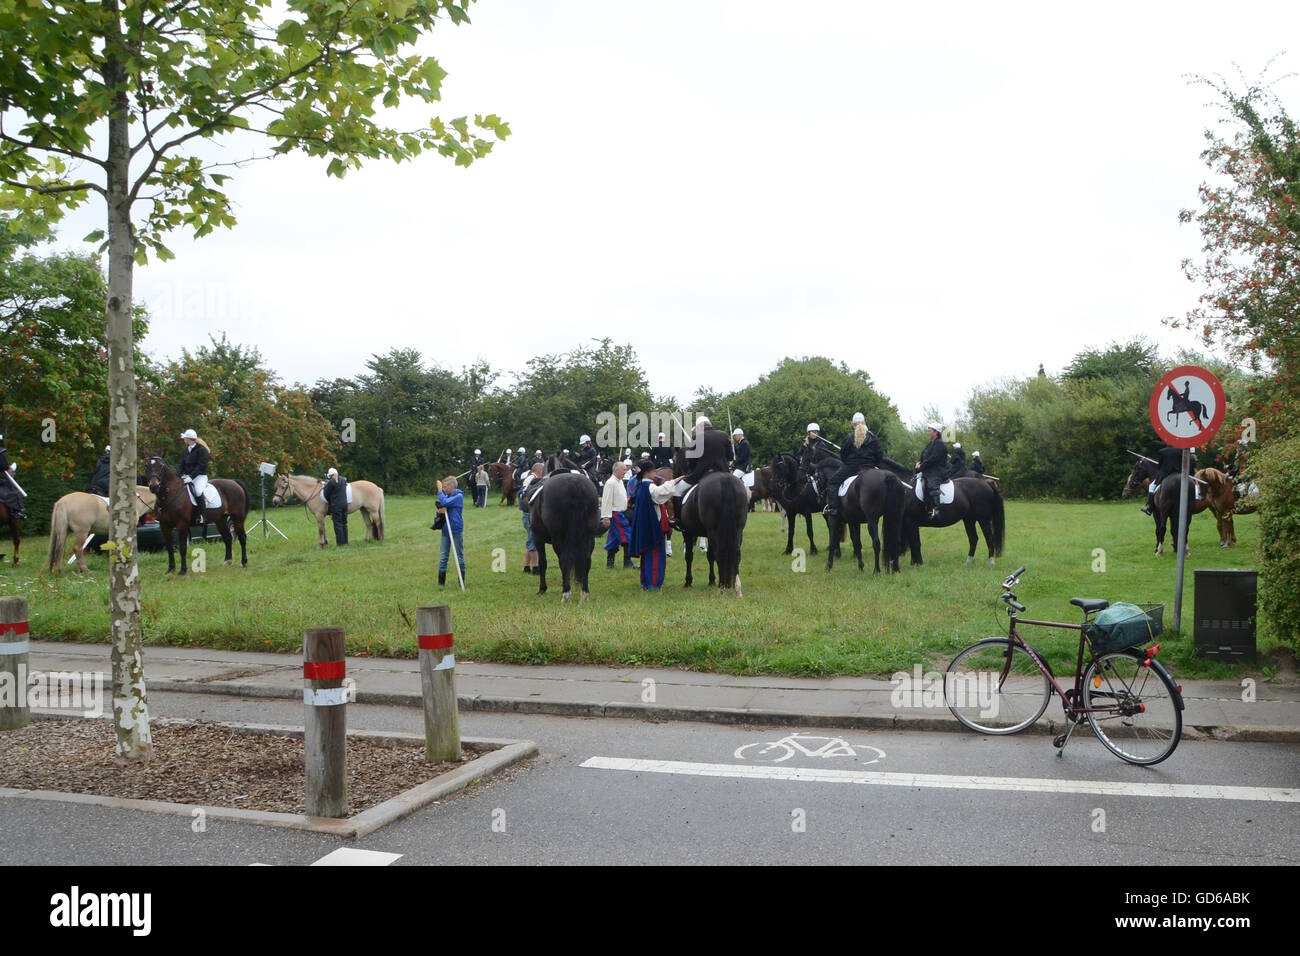 Many riders with their horses meet on a lawn, the funny thing is that there is a sign that says no riding. Stock Photo